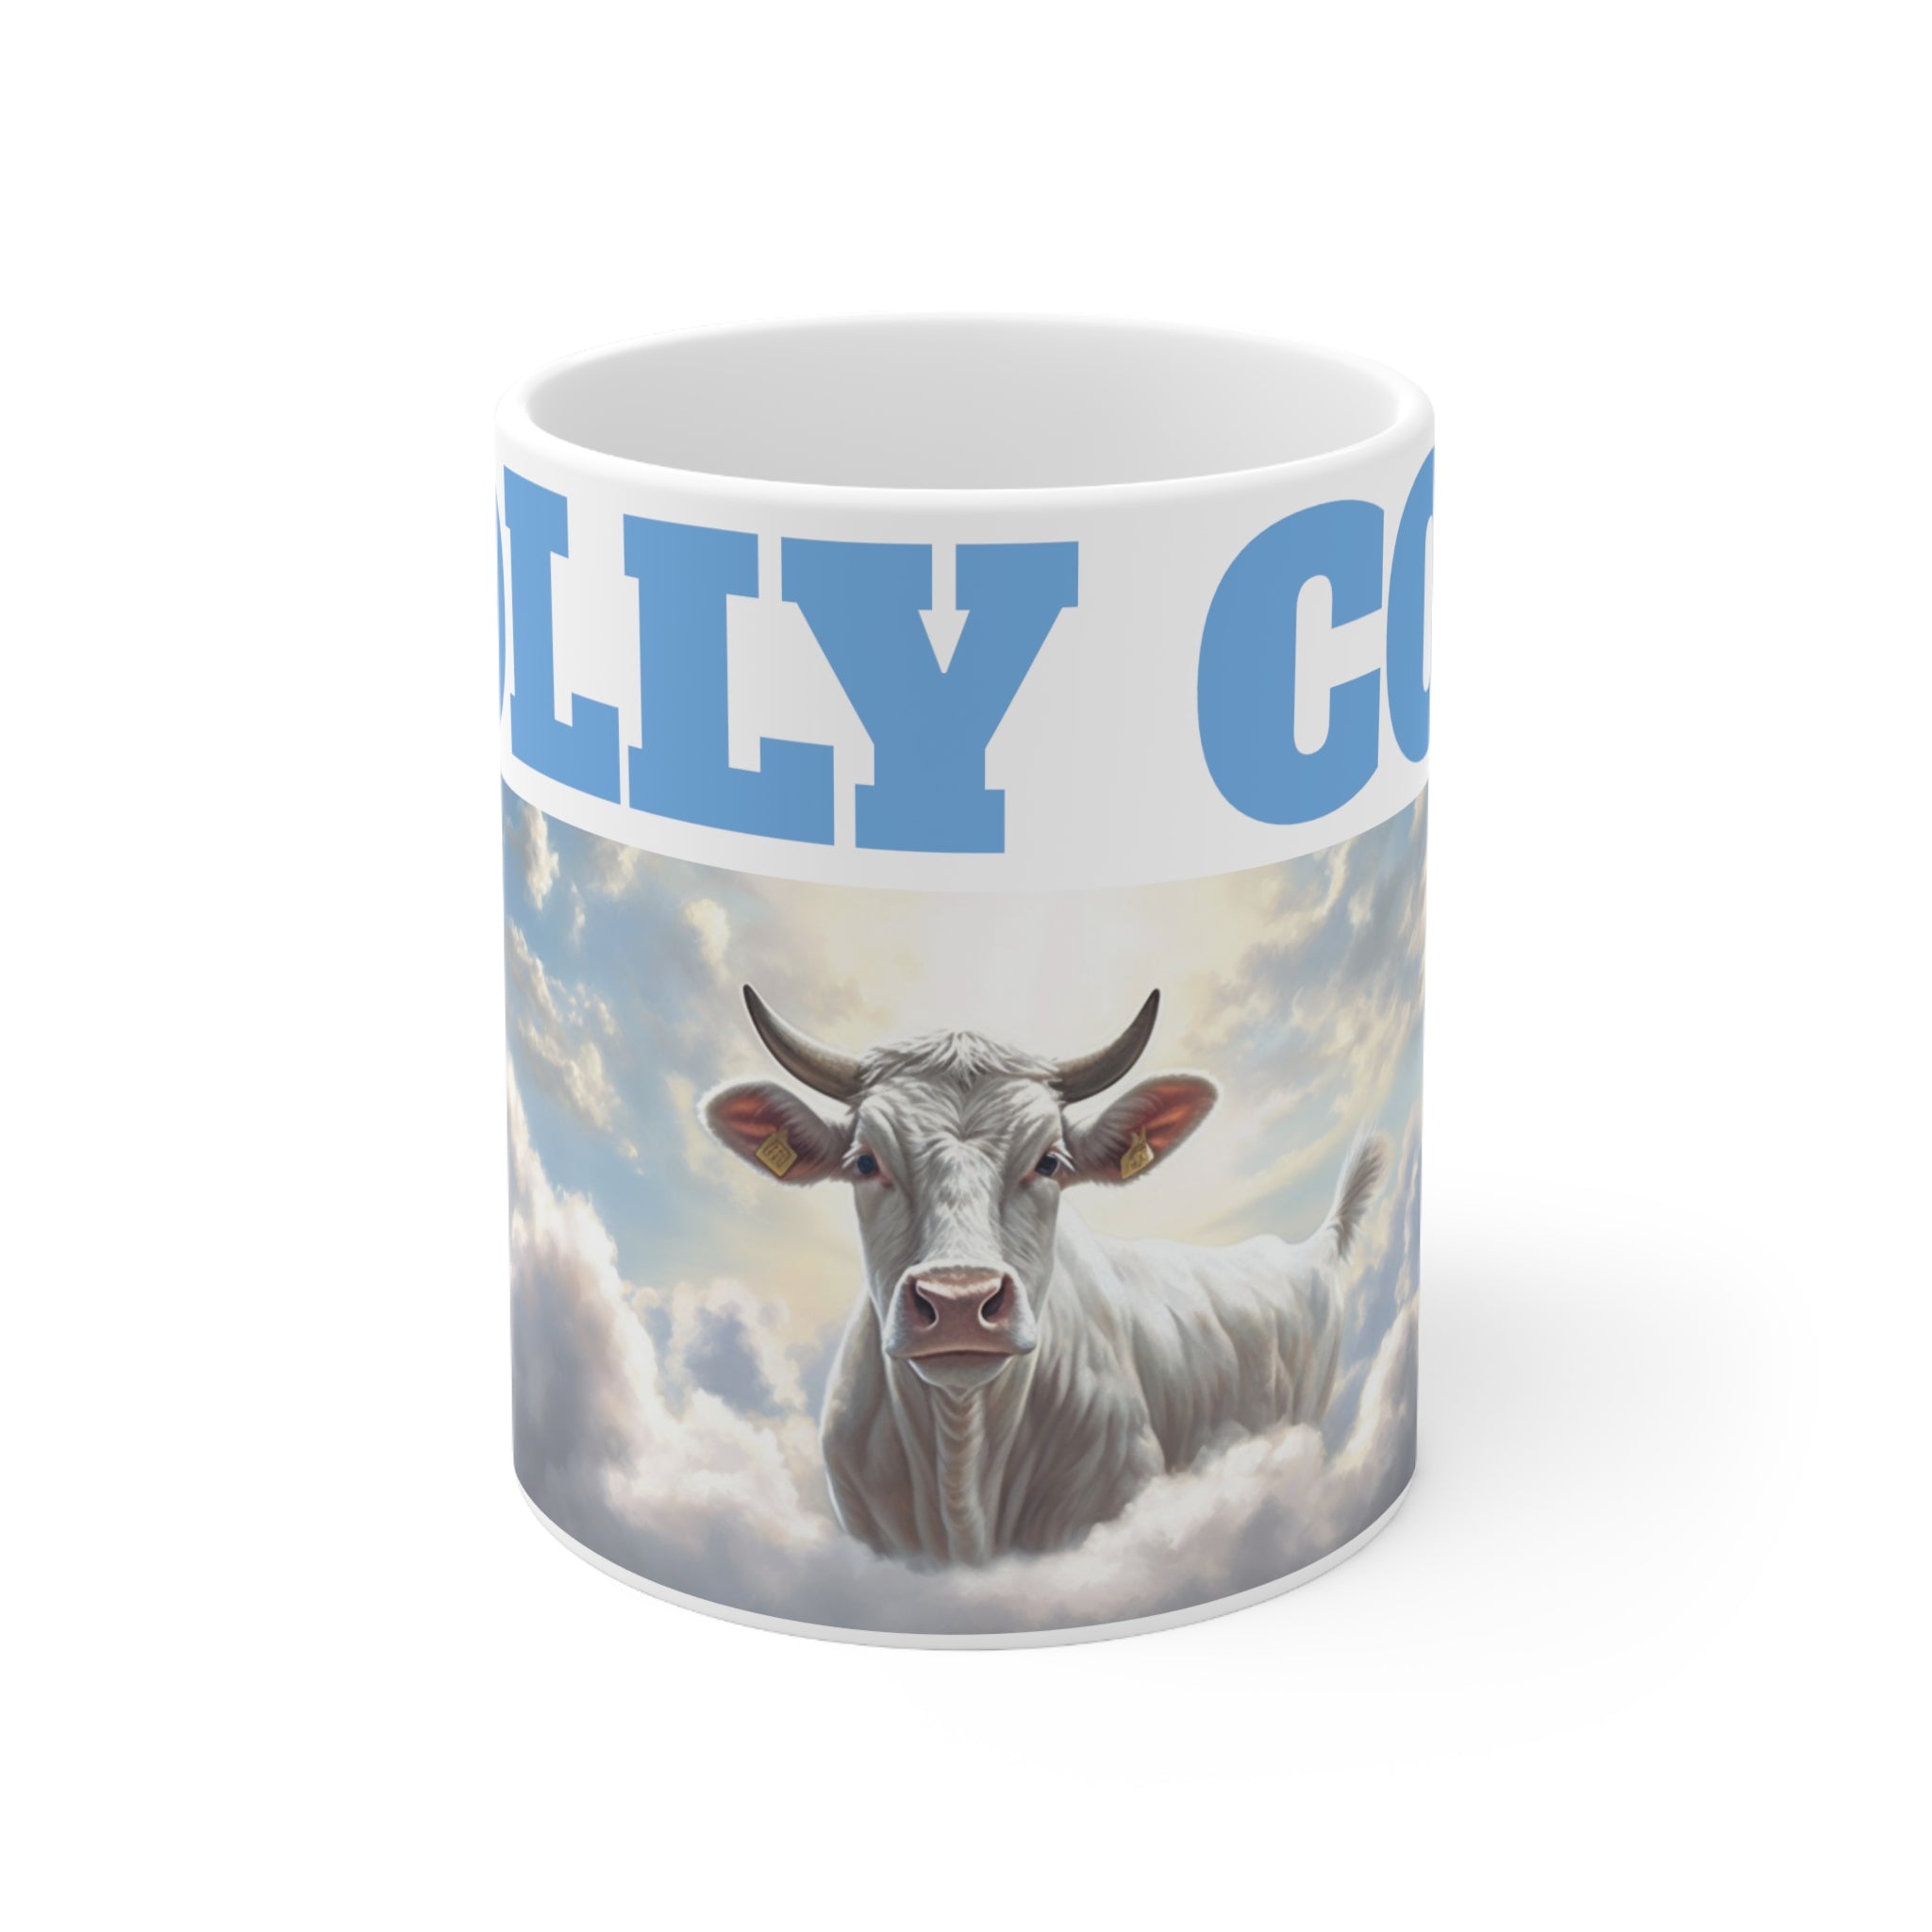 Affordable Museum Quality Poster / Print, Posterb.comifllucial HOLLY COW MUG, Original Art By ifllucial.White ceramic
11 oz (0.33 l)
Rounded corners
C-handle
Lead and BPA-freeMug